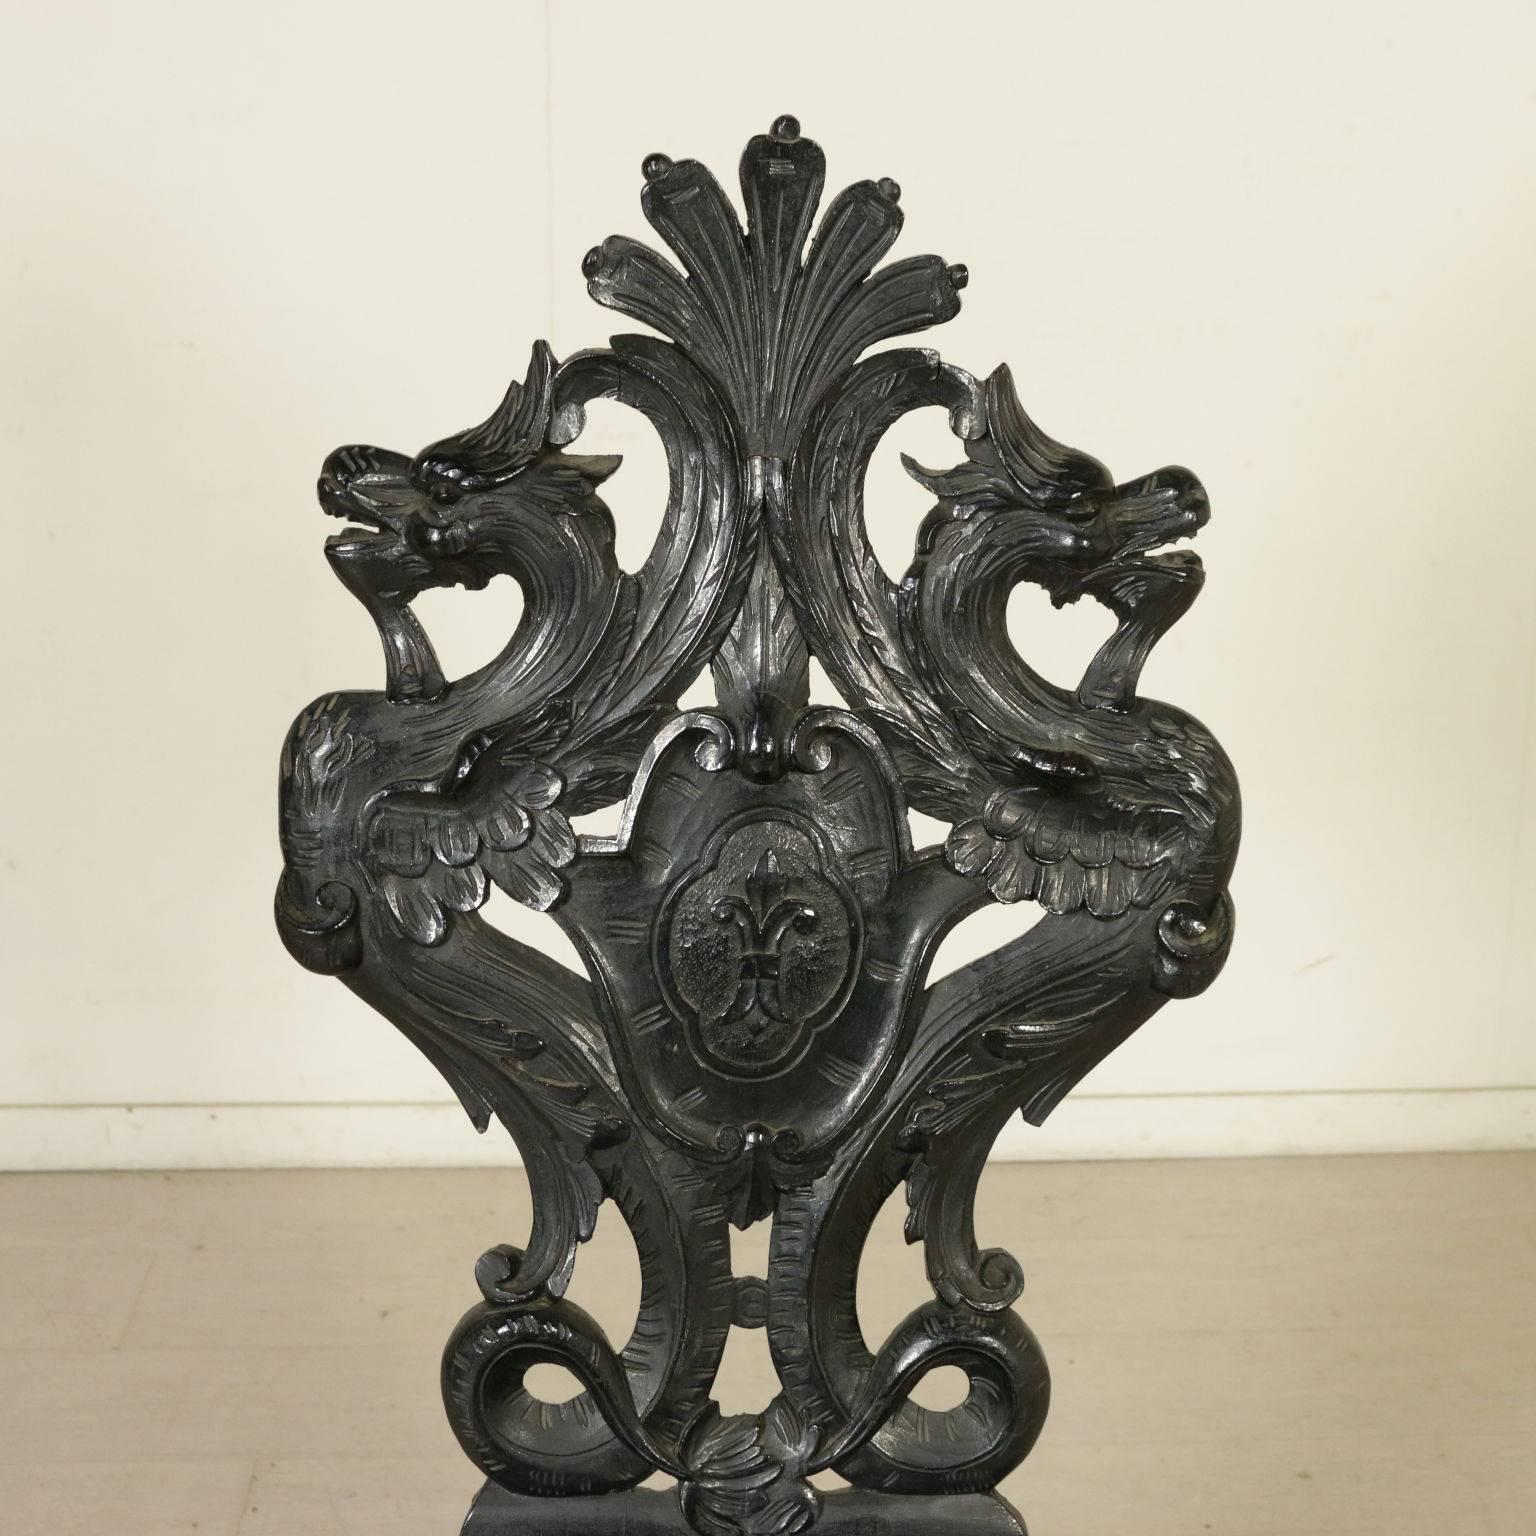 Renaissance Revival style pair of walnut carved chairs. They feature richly carved front legs and backrests. Perforated with masks, dragons and central coat of arms. Manufactured in Italy, early 20th century.